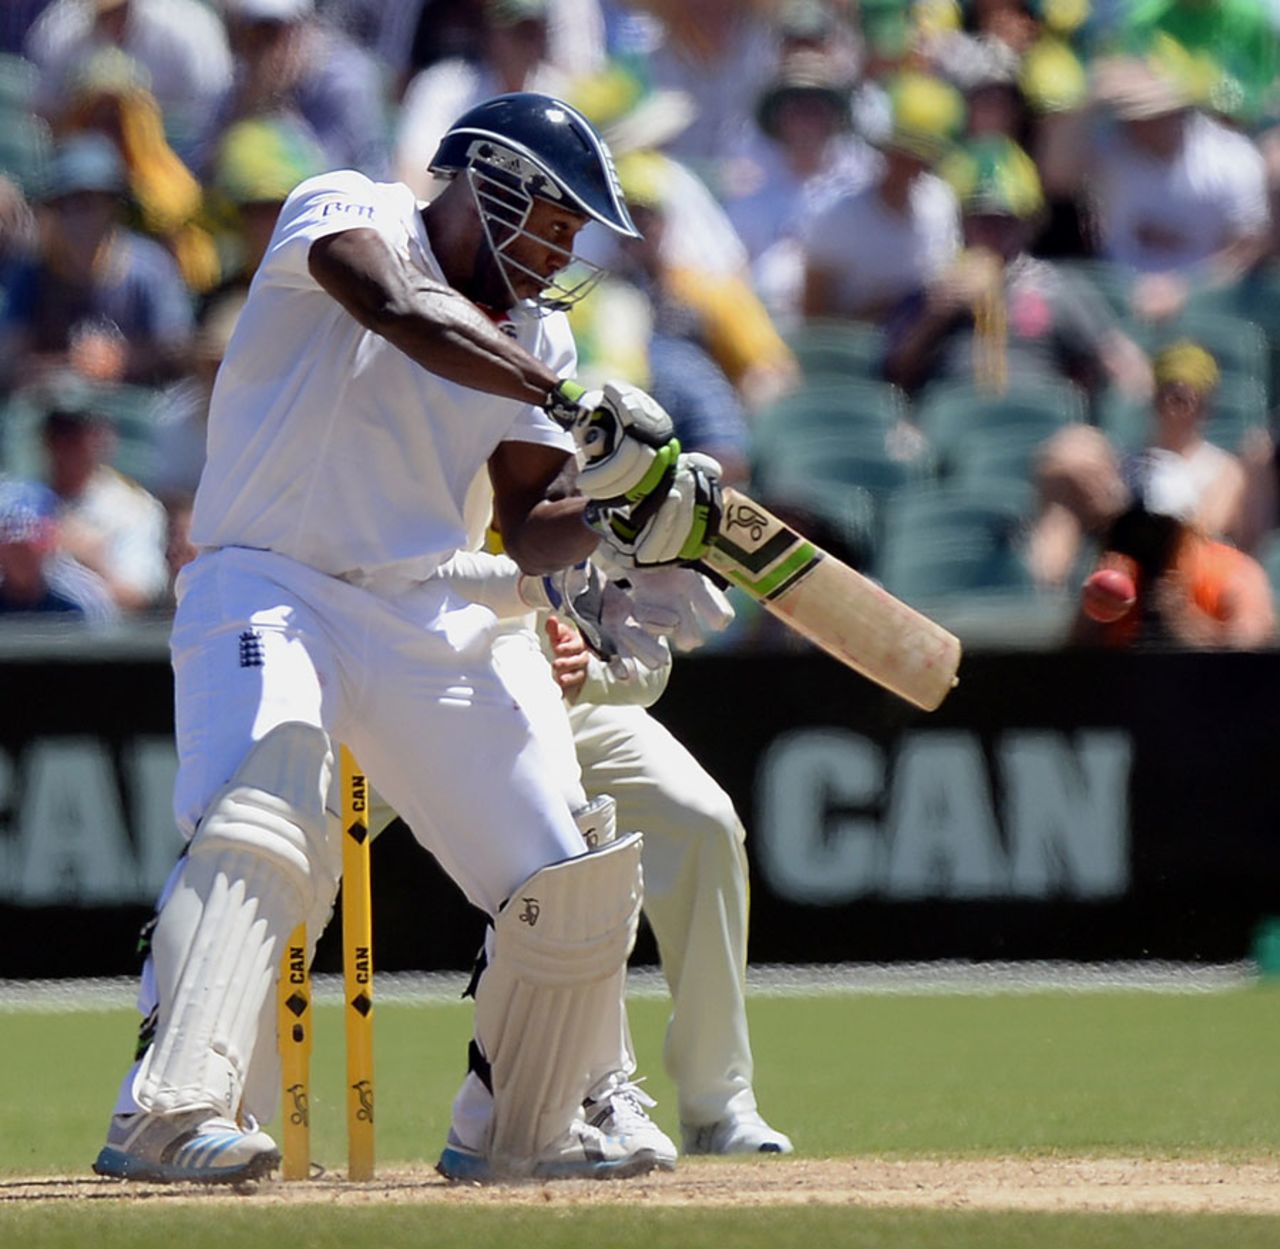 Michael Carberry cut well during his half-century, Australia v England, 2nd Test, Adelaide, 3rd day, December 7, 2013